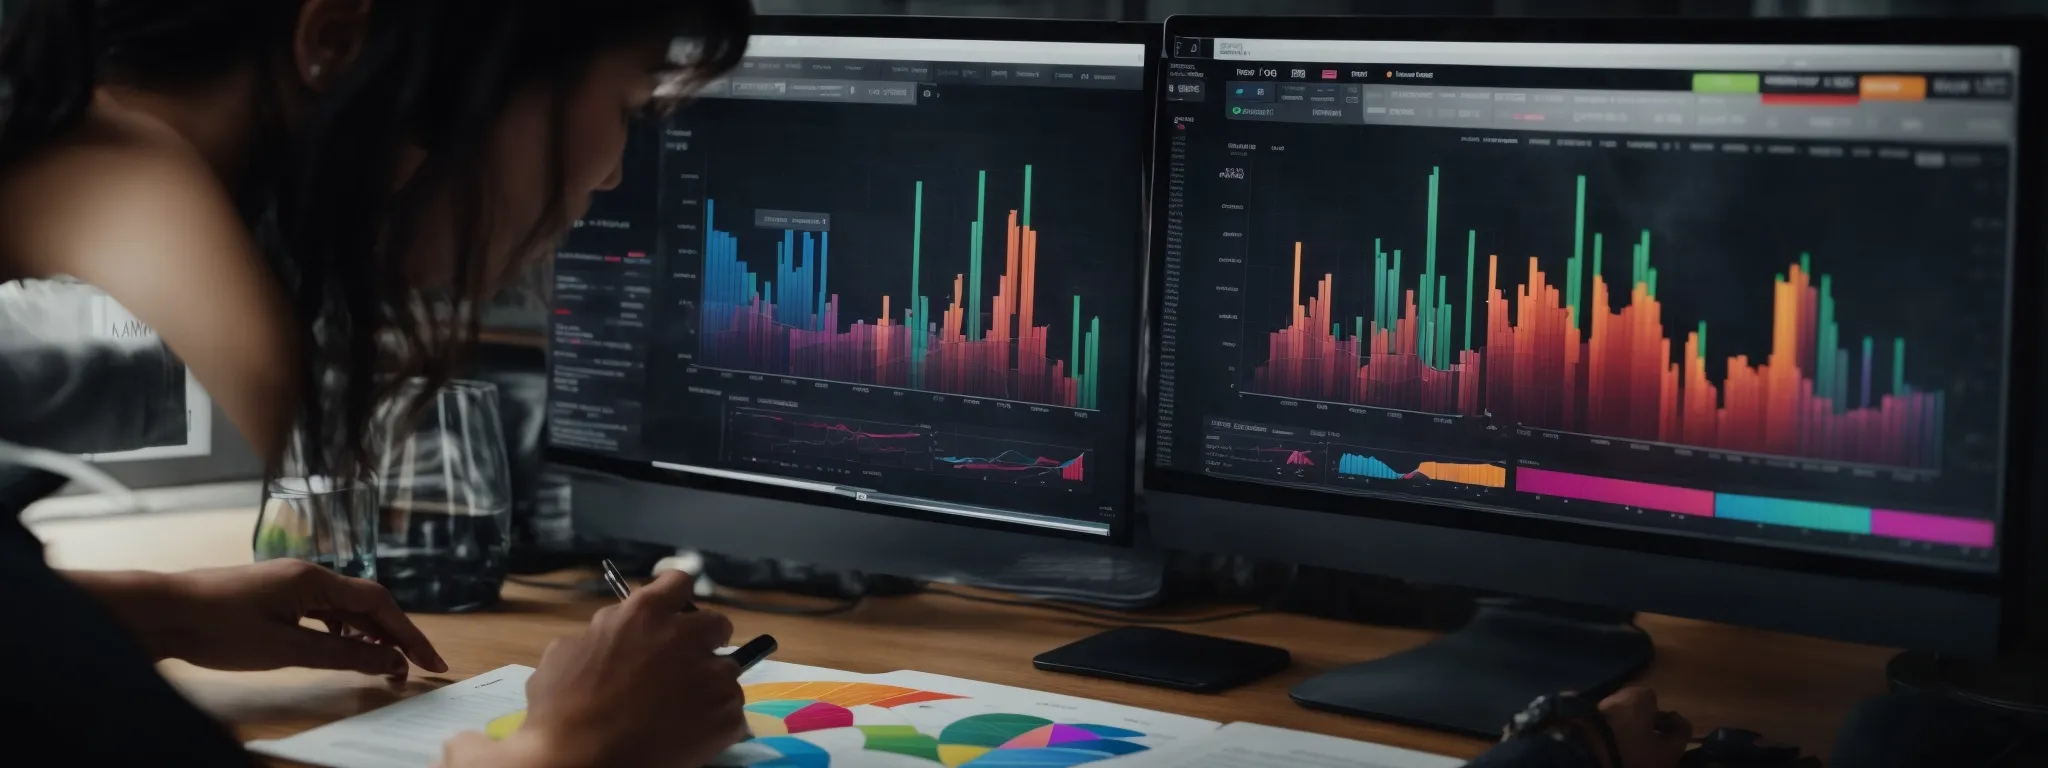 a marketer reviews colorful graphs and charts on a computer dashboard, analyzing digital advertising campaign metrics.